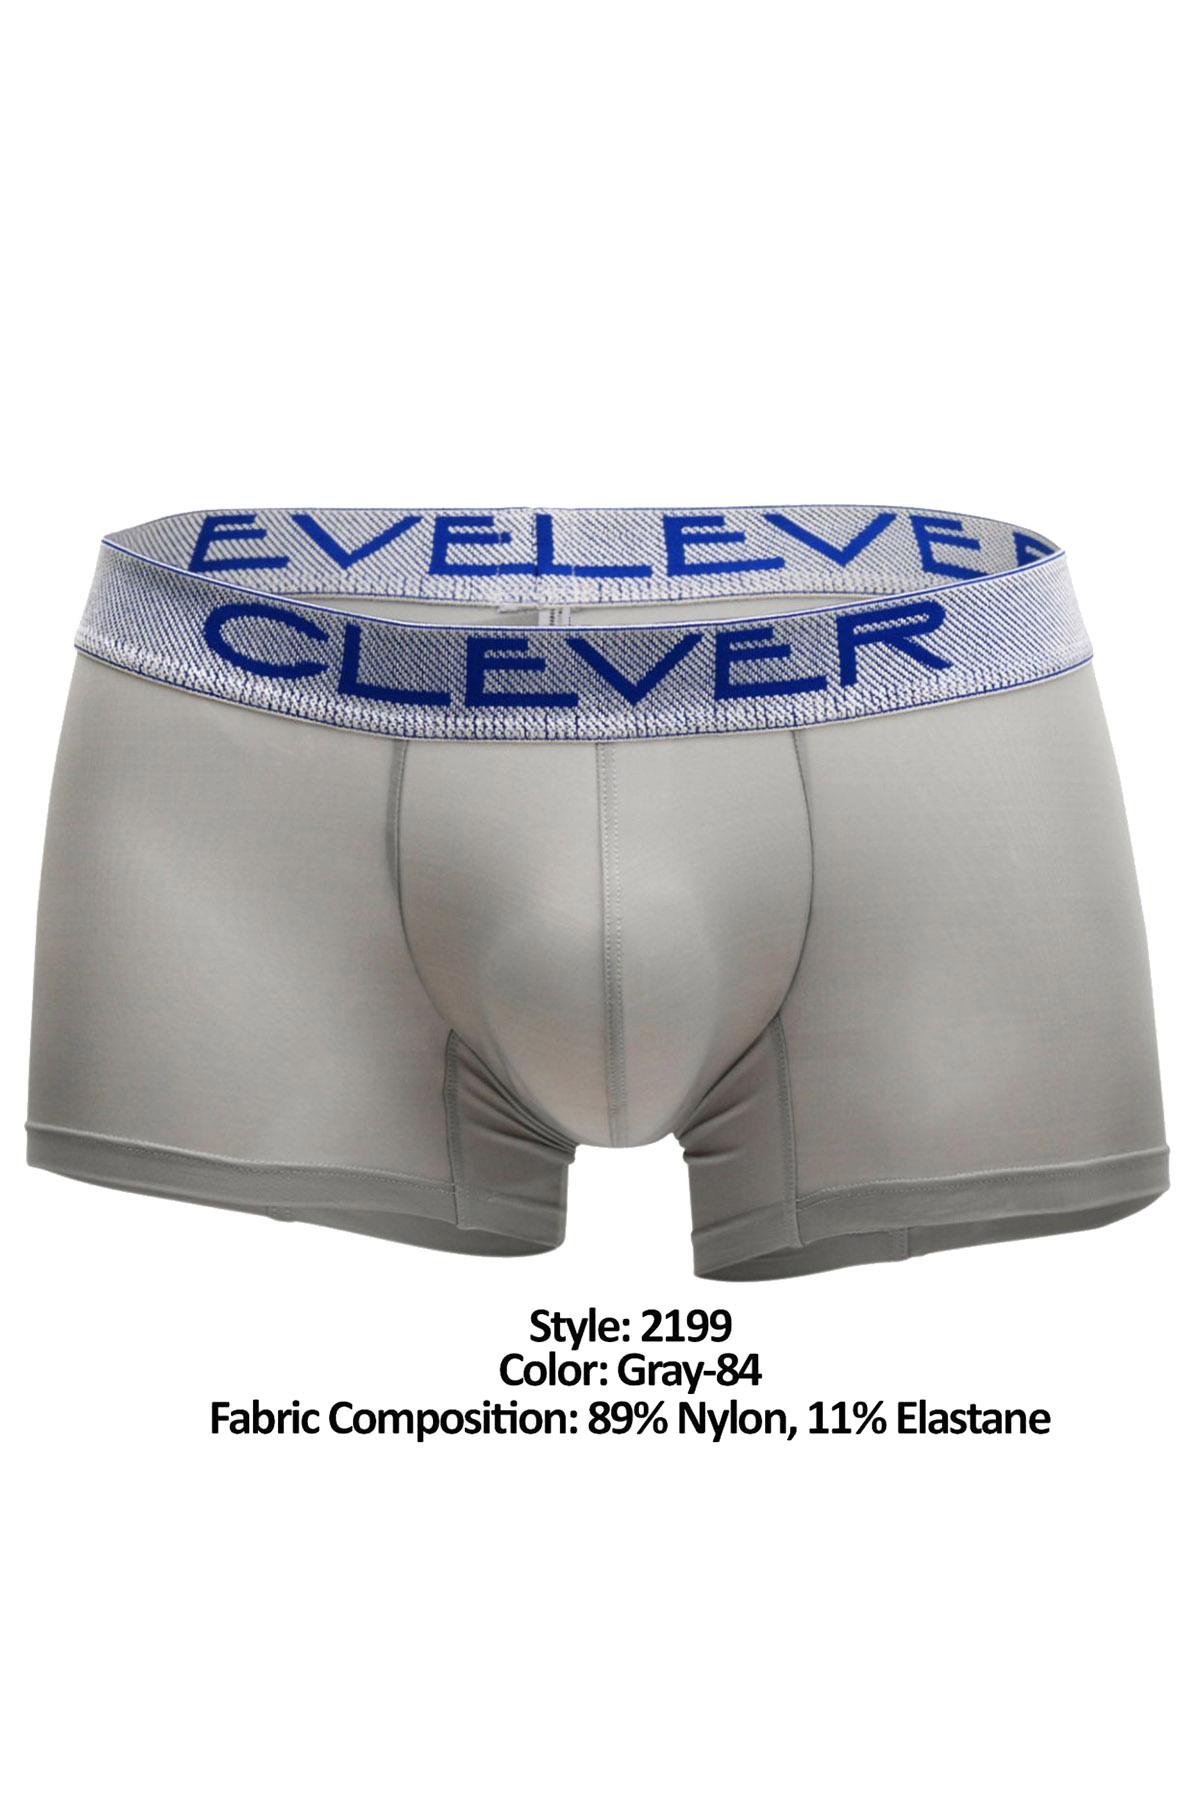 Clever Light Grey/Ivory Stitch Limited Edition Trunk